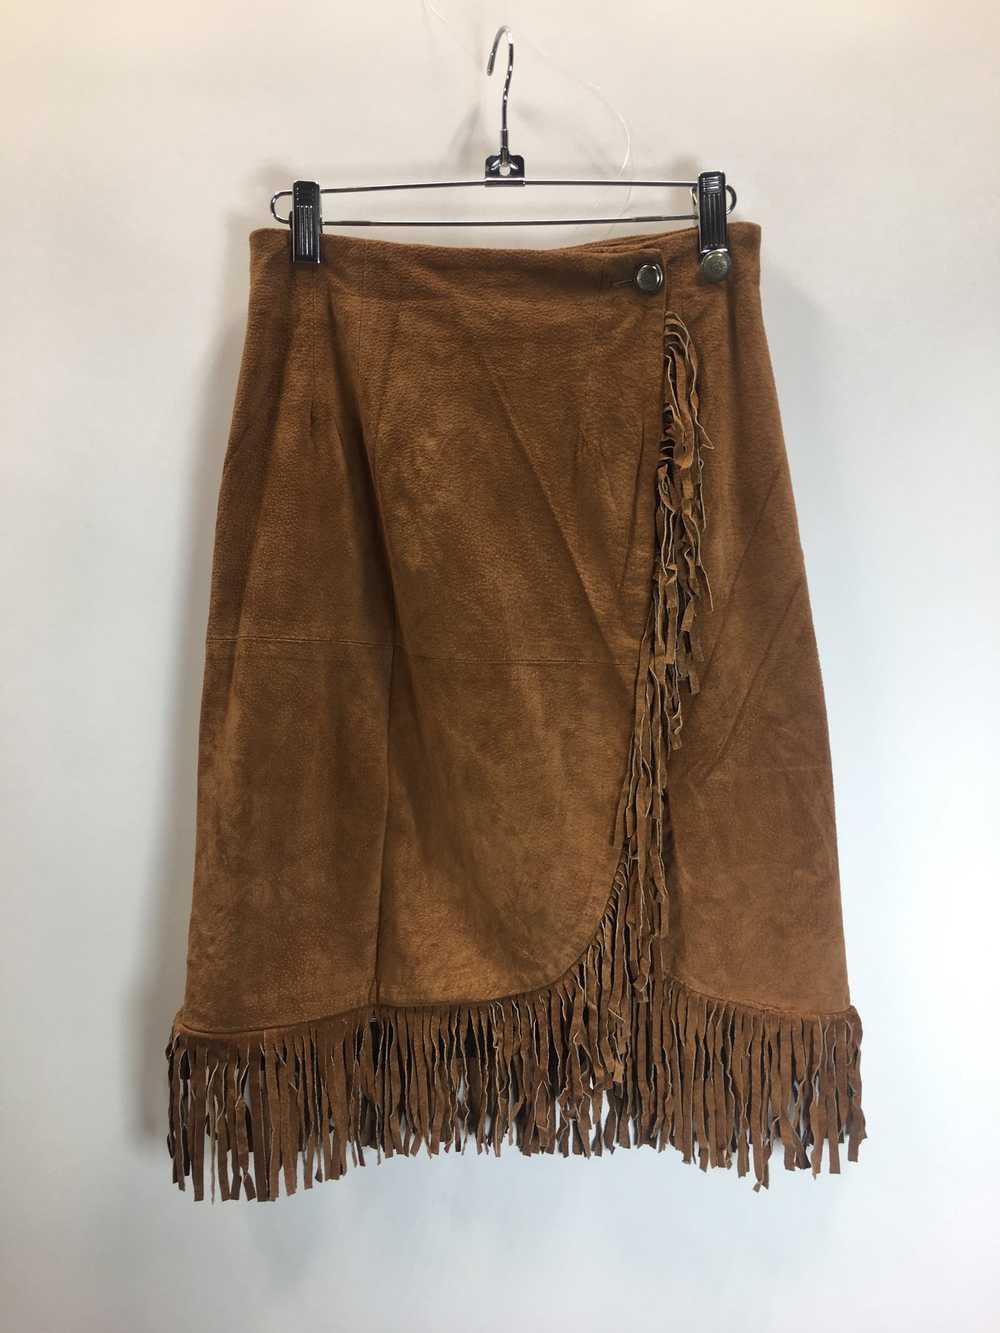 90’s Suede Skirt - image 1